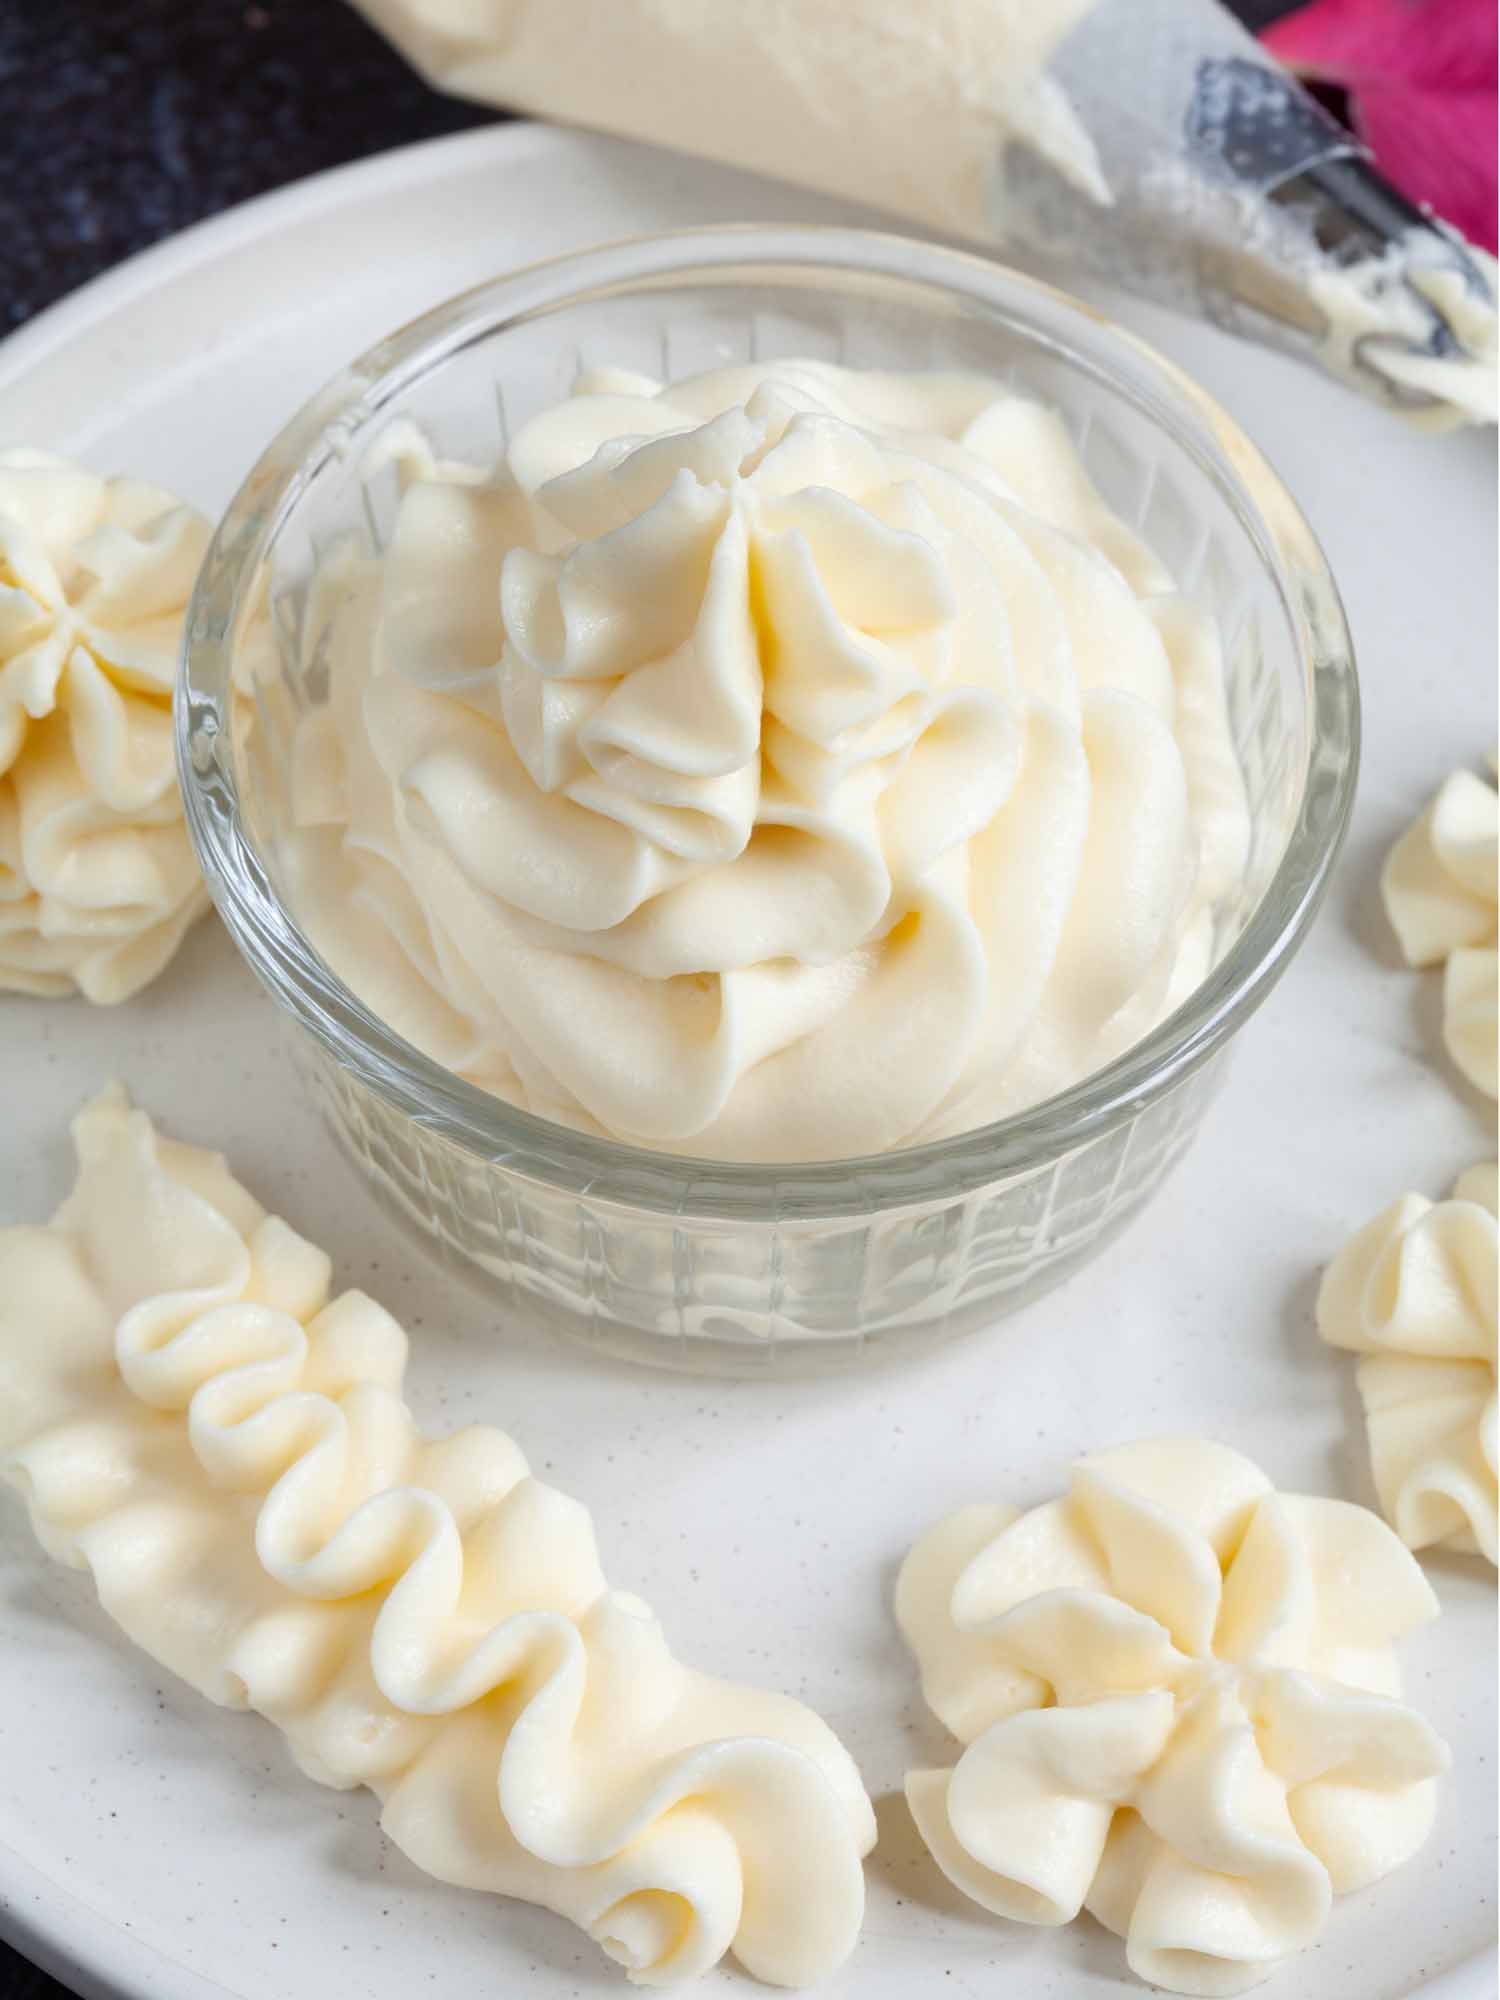 Goat cheese buttercream frosting